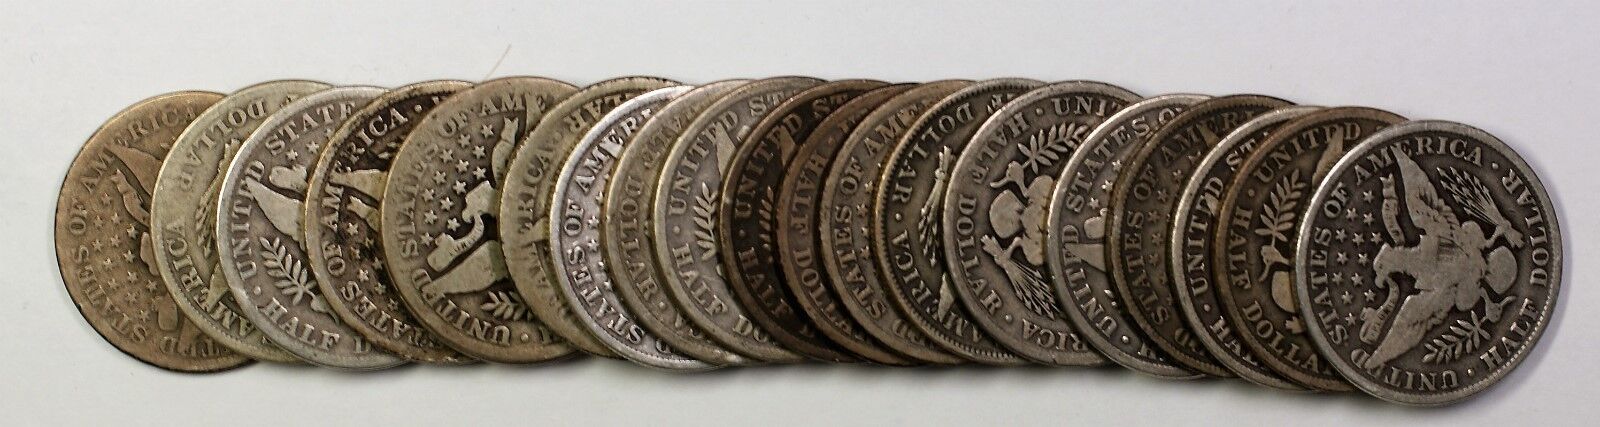 1899 Barber Half Dollar 50c Roll 20 Circulated 90% Old Silver Coins Lot